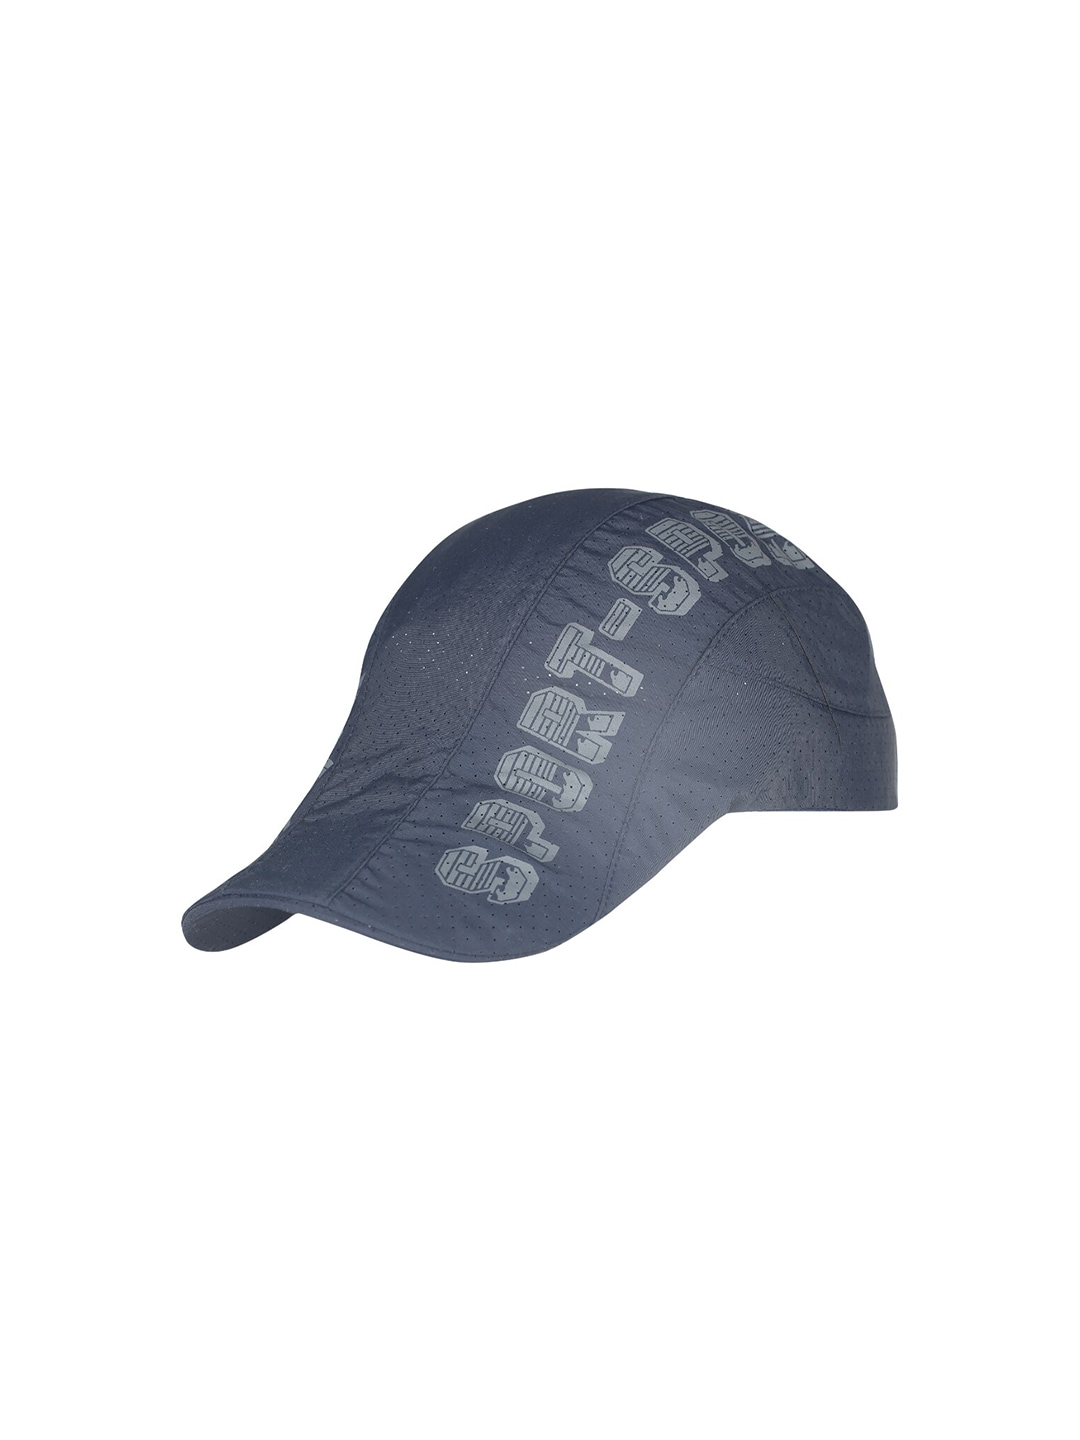 iSWEVEN Unisex Blue Solid Ascot Caps Price in India